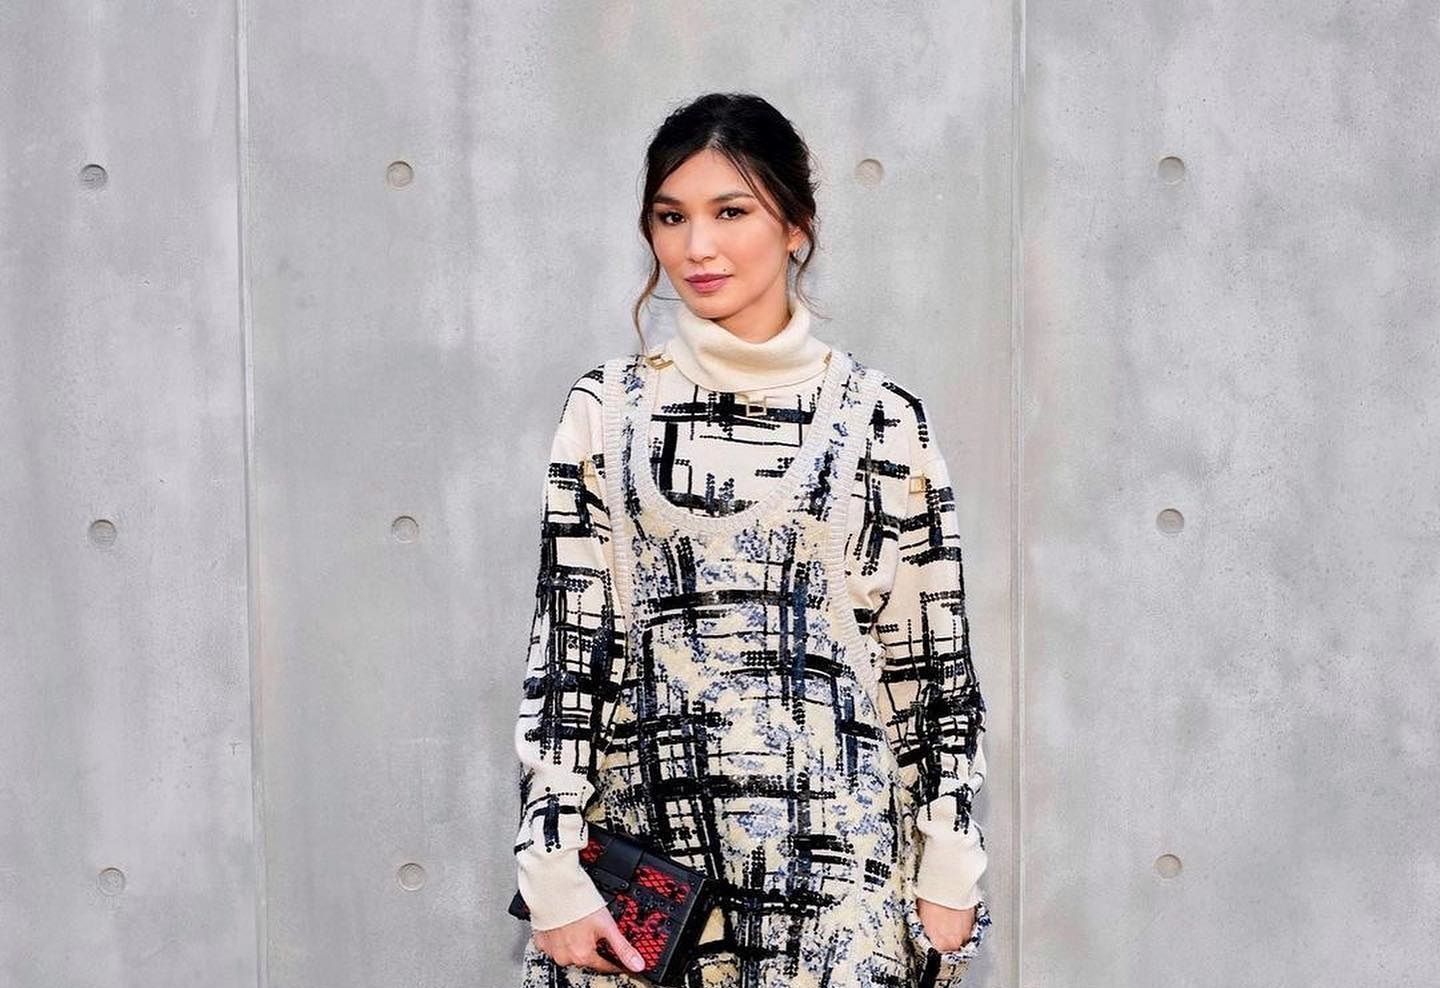 Gemma Chan to Executive Produce, Act in a Netflix Limited Series